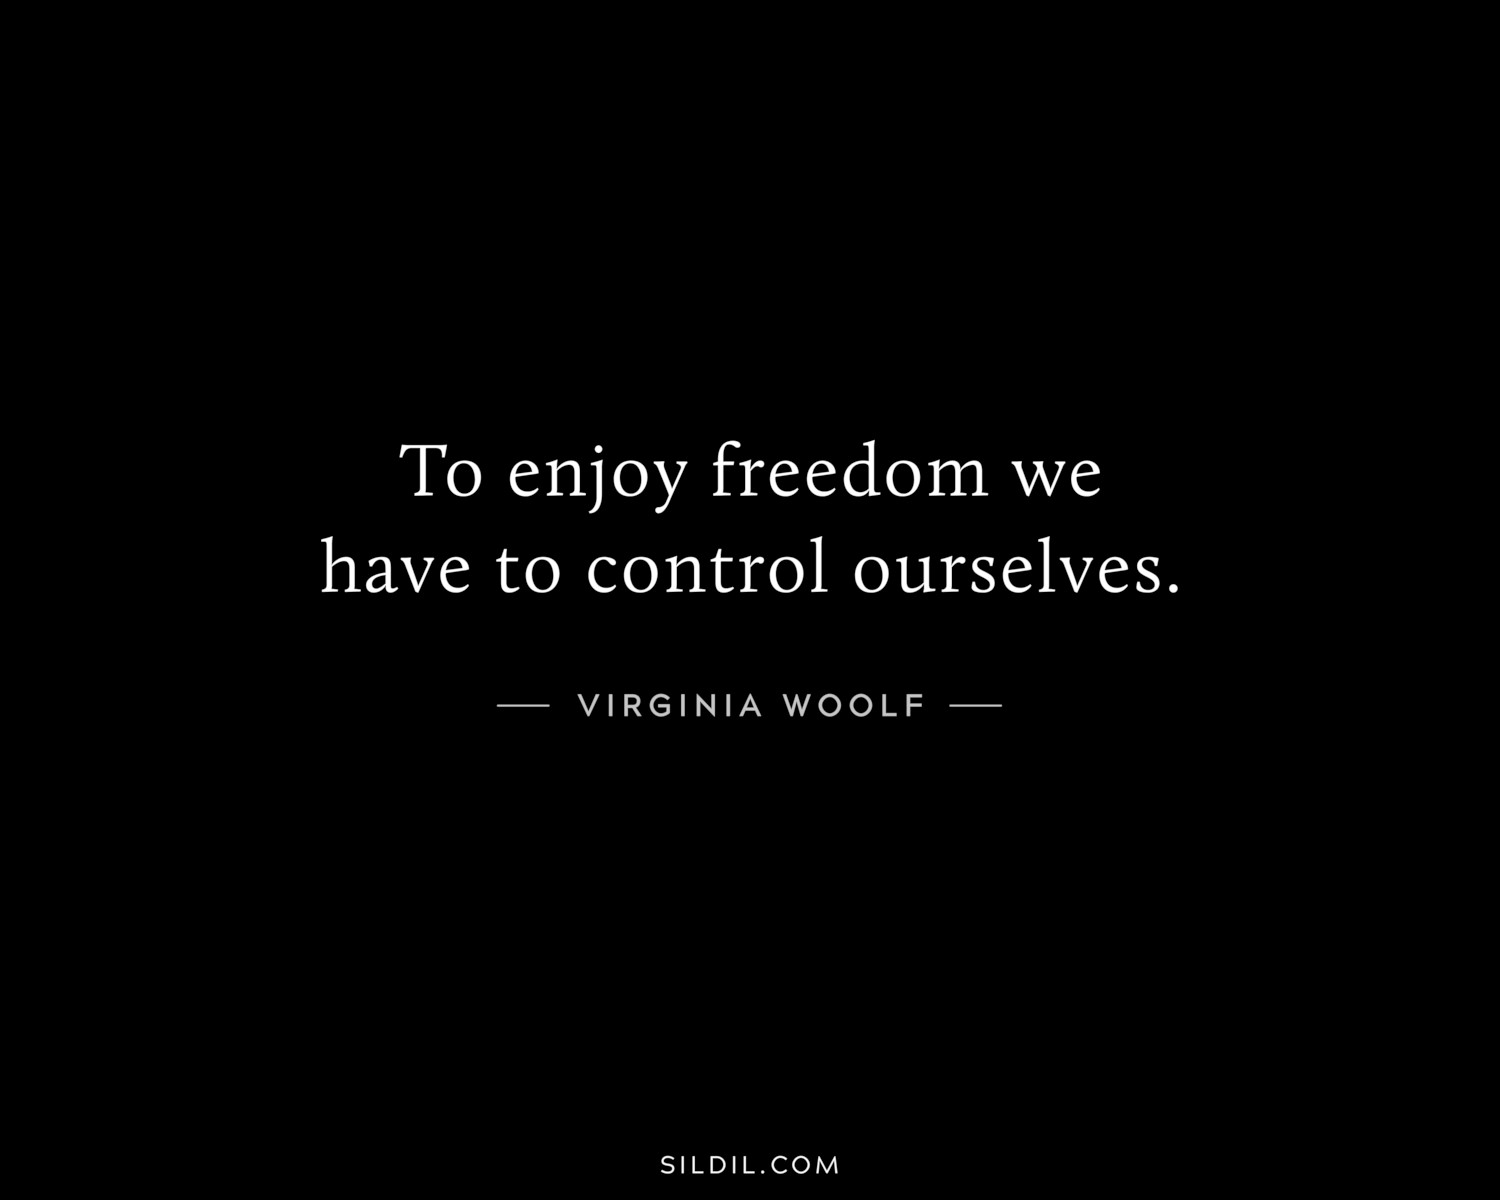 To enjoy freedom we have to control ourselves.